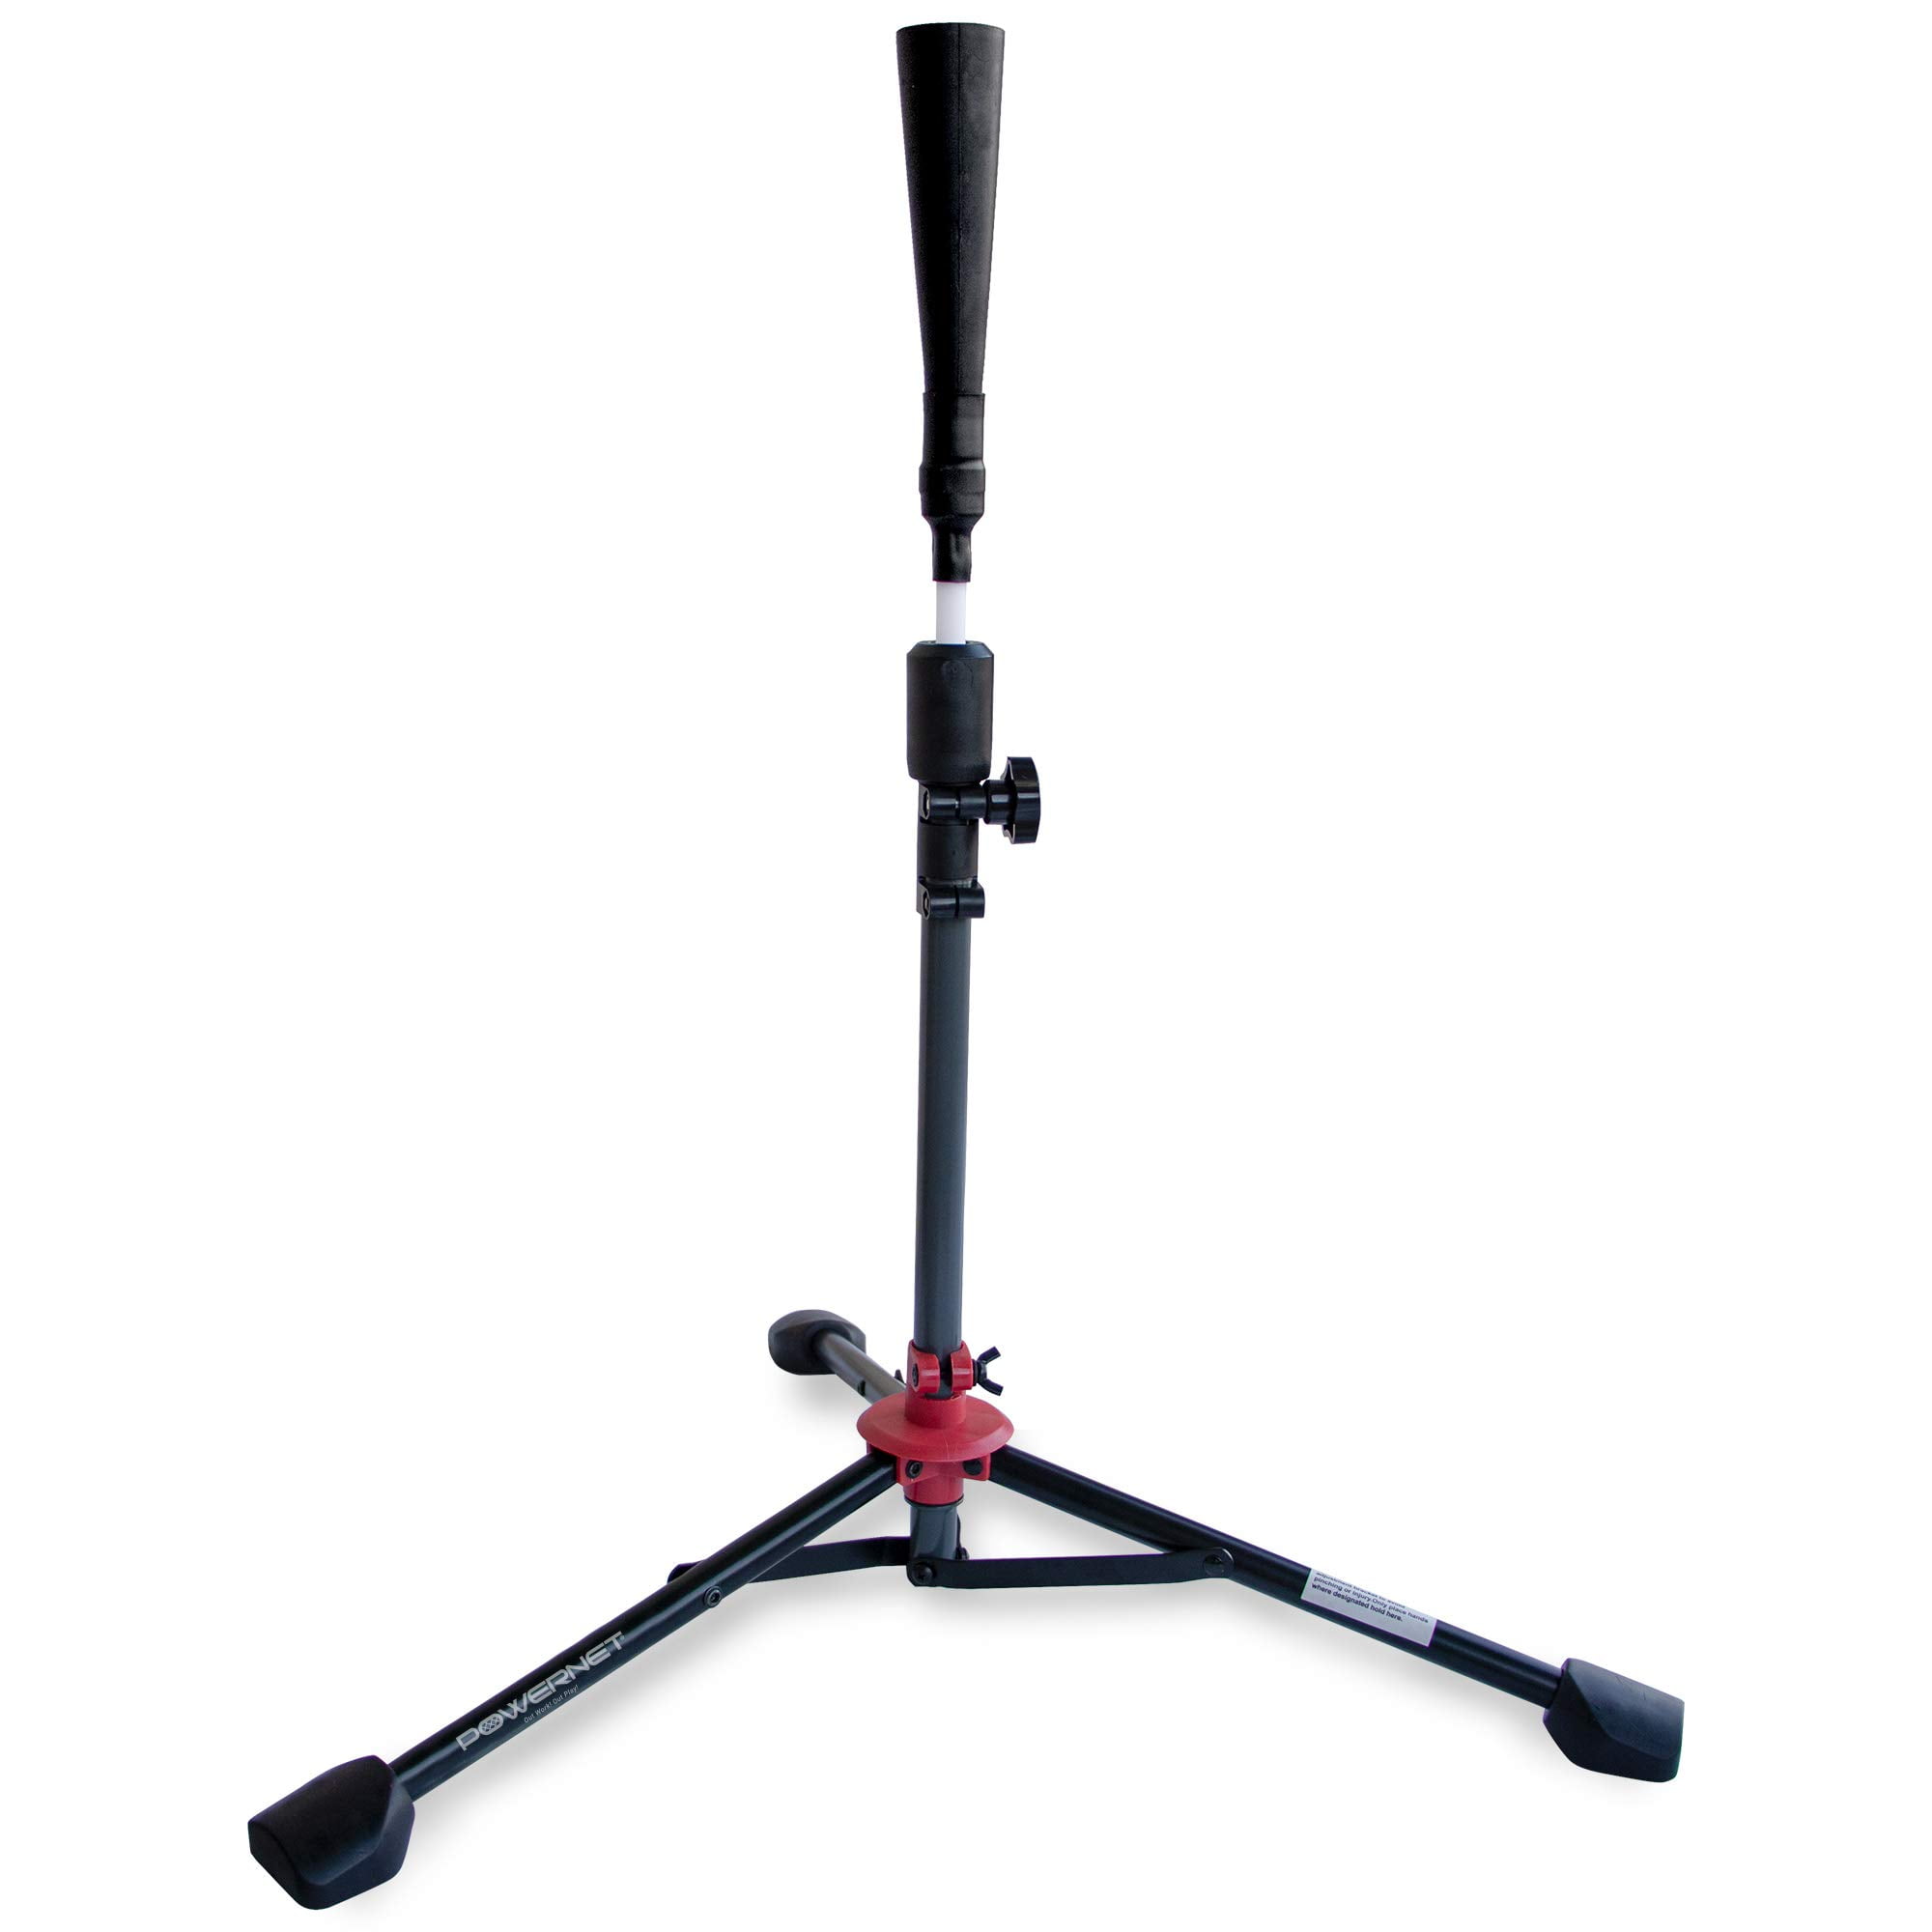 SETS UP IN SECONDS RAWLINGS YOUTH BASEBALL TRIPOD TRAVEL BATTING TEE 